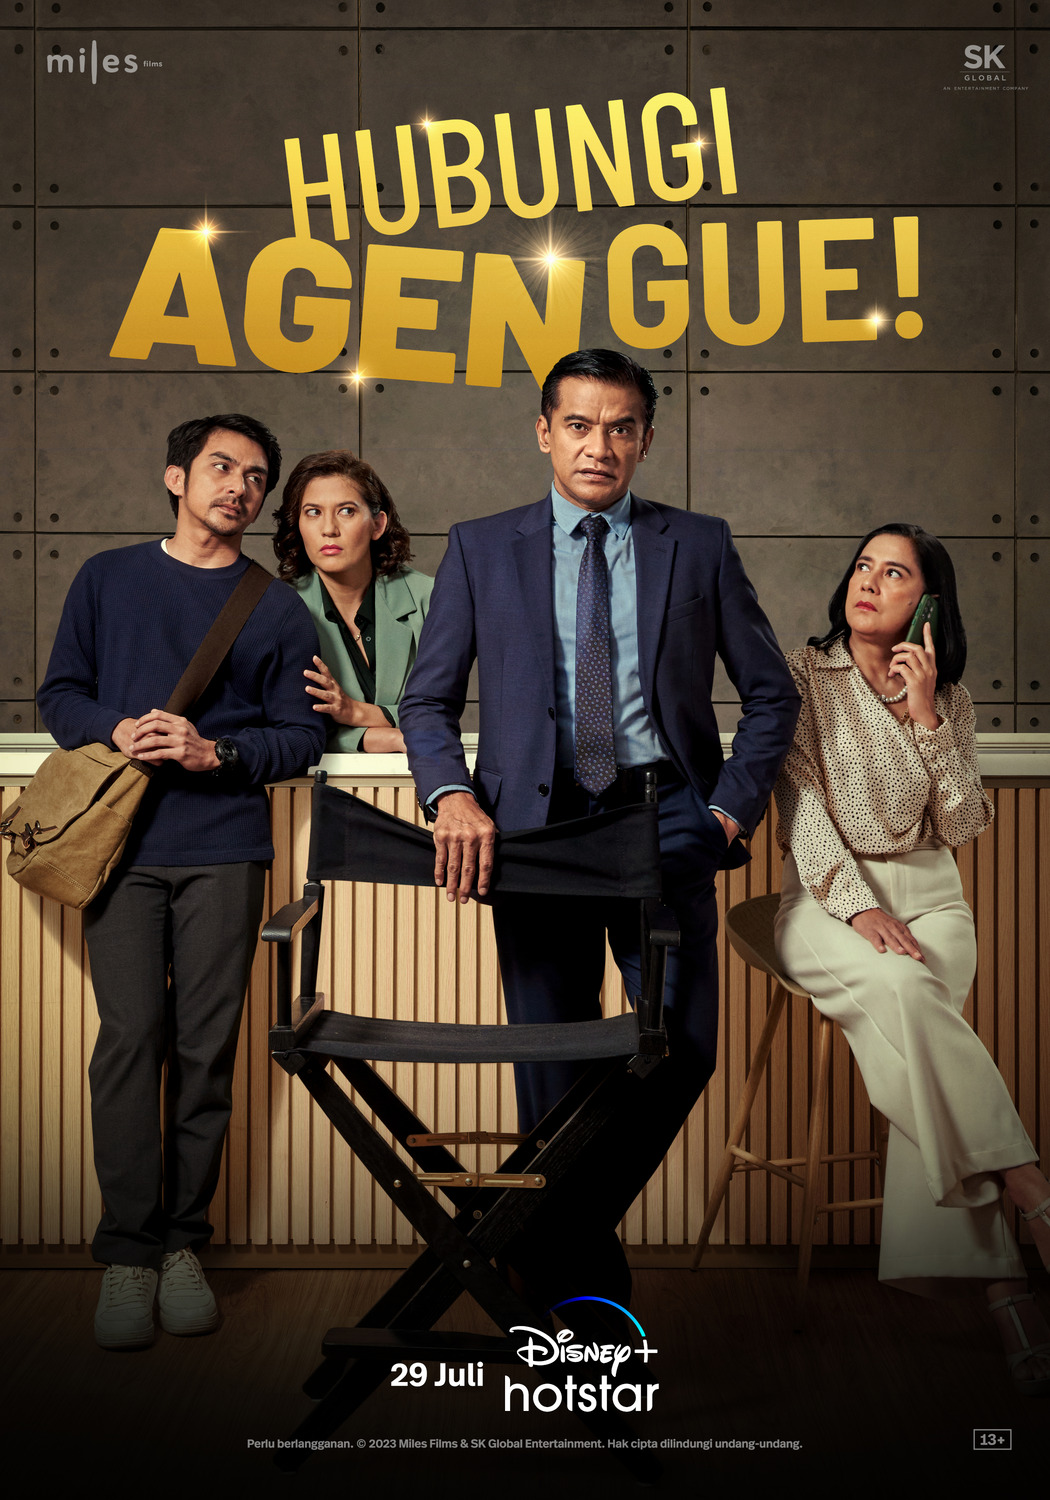 Extra Large TV Poster Image for Hubungi Agen Gue! 